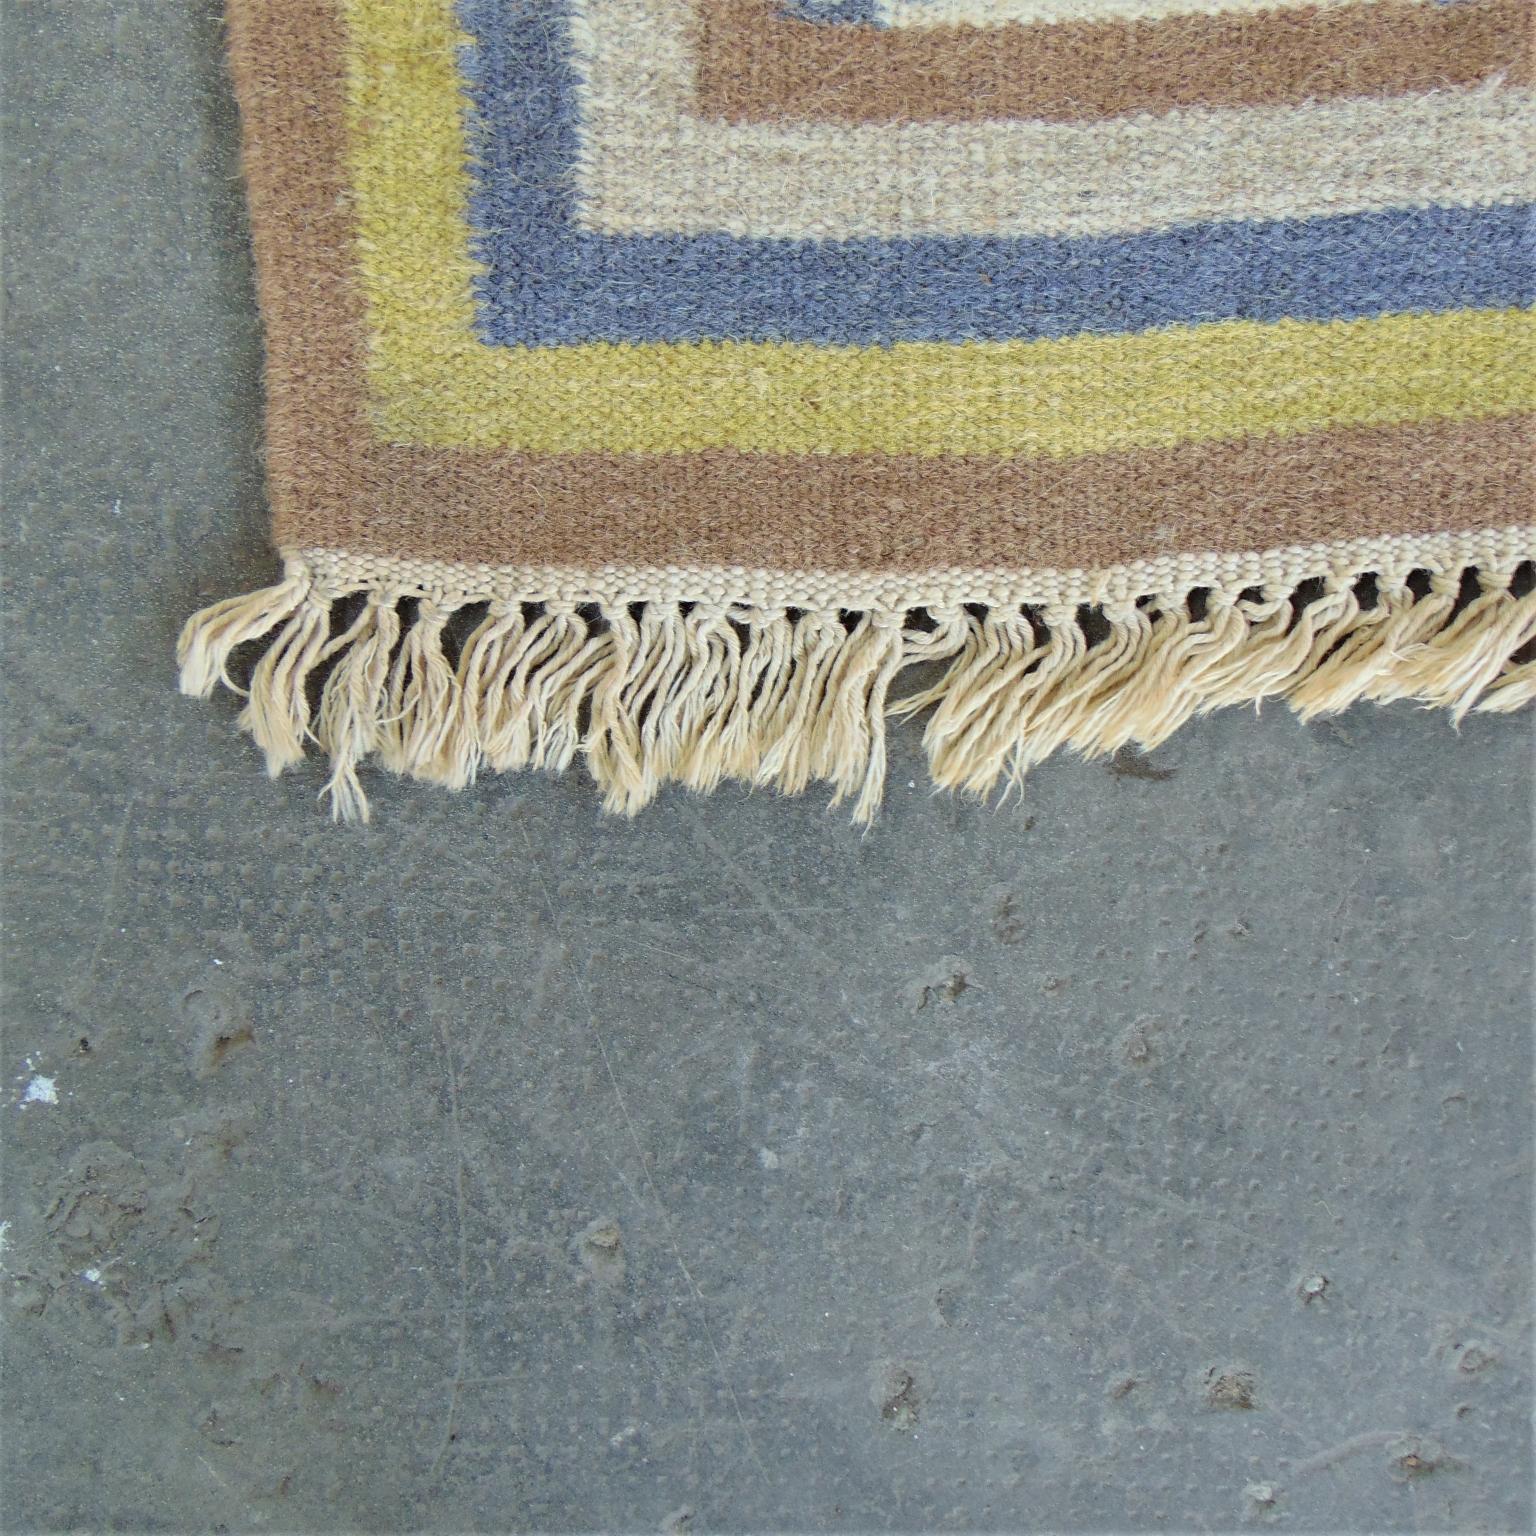 1975 Handwoven Kilim Vintage Indian Rug Blue Brown Yellow Ivory Background India For Sale 5